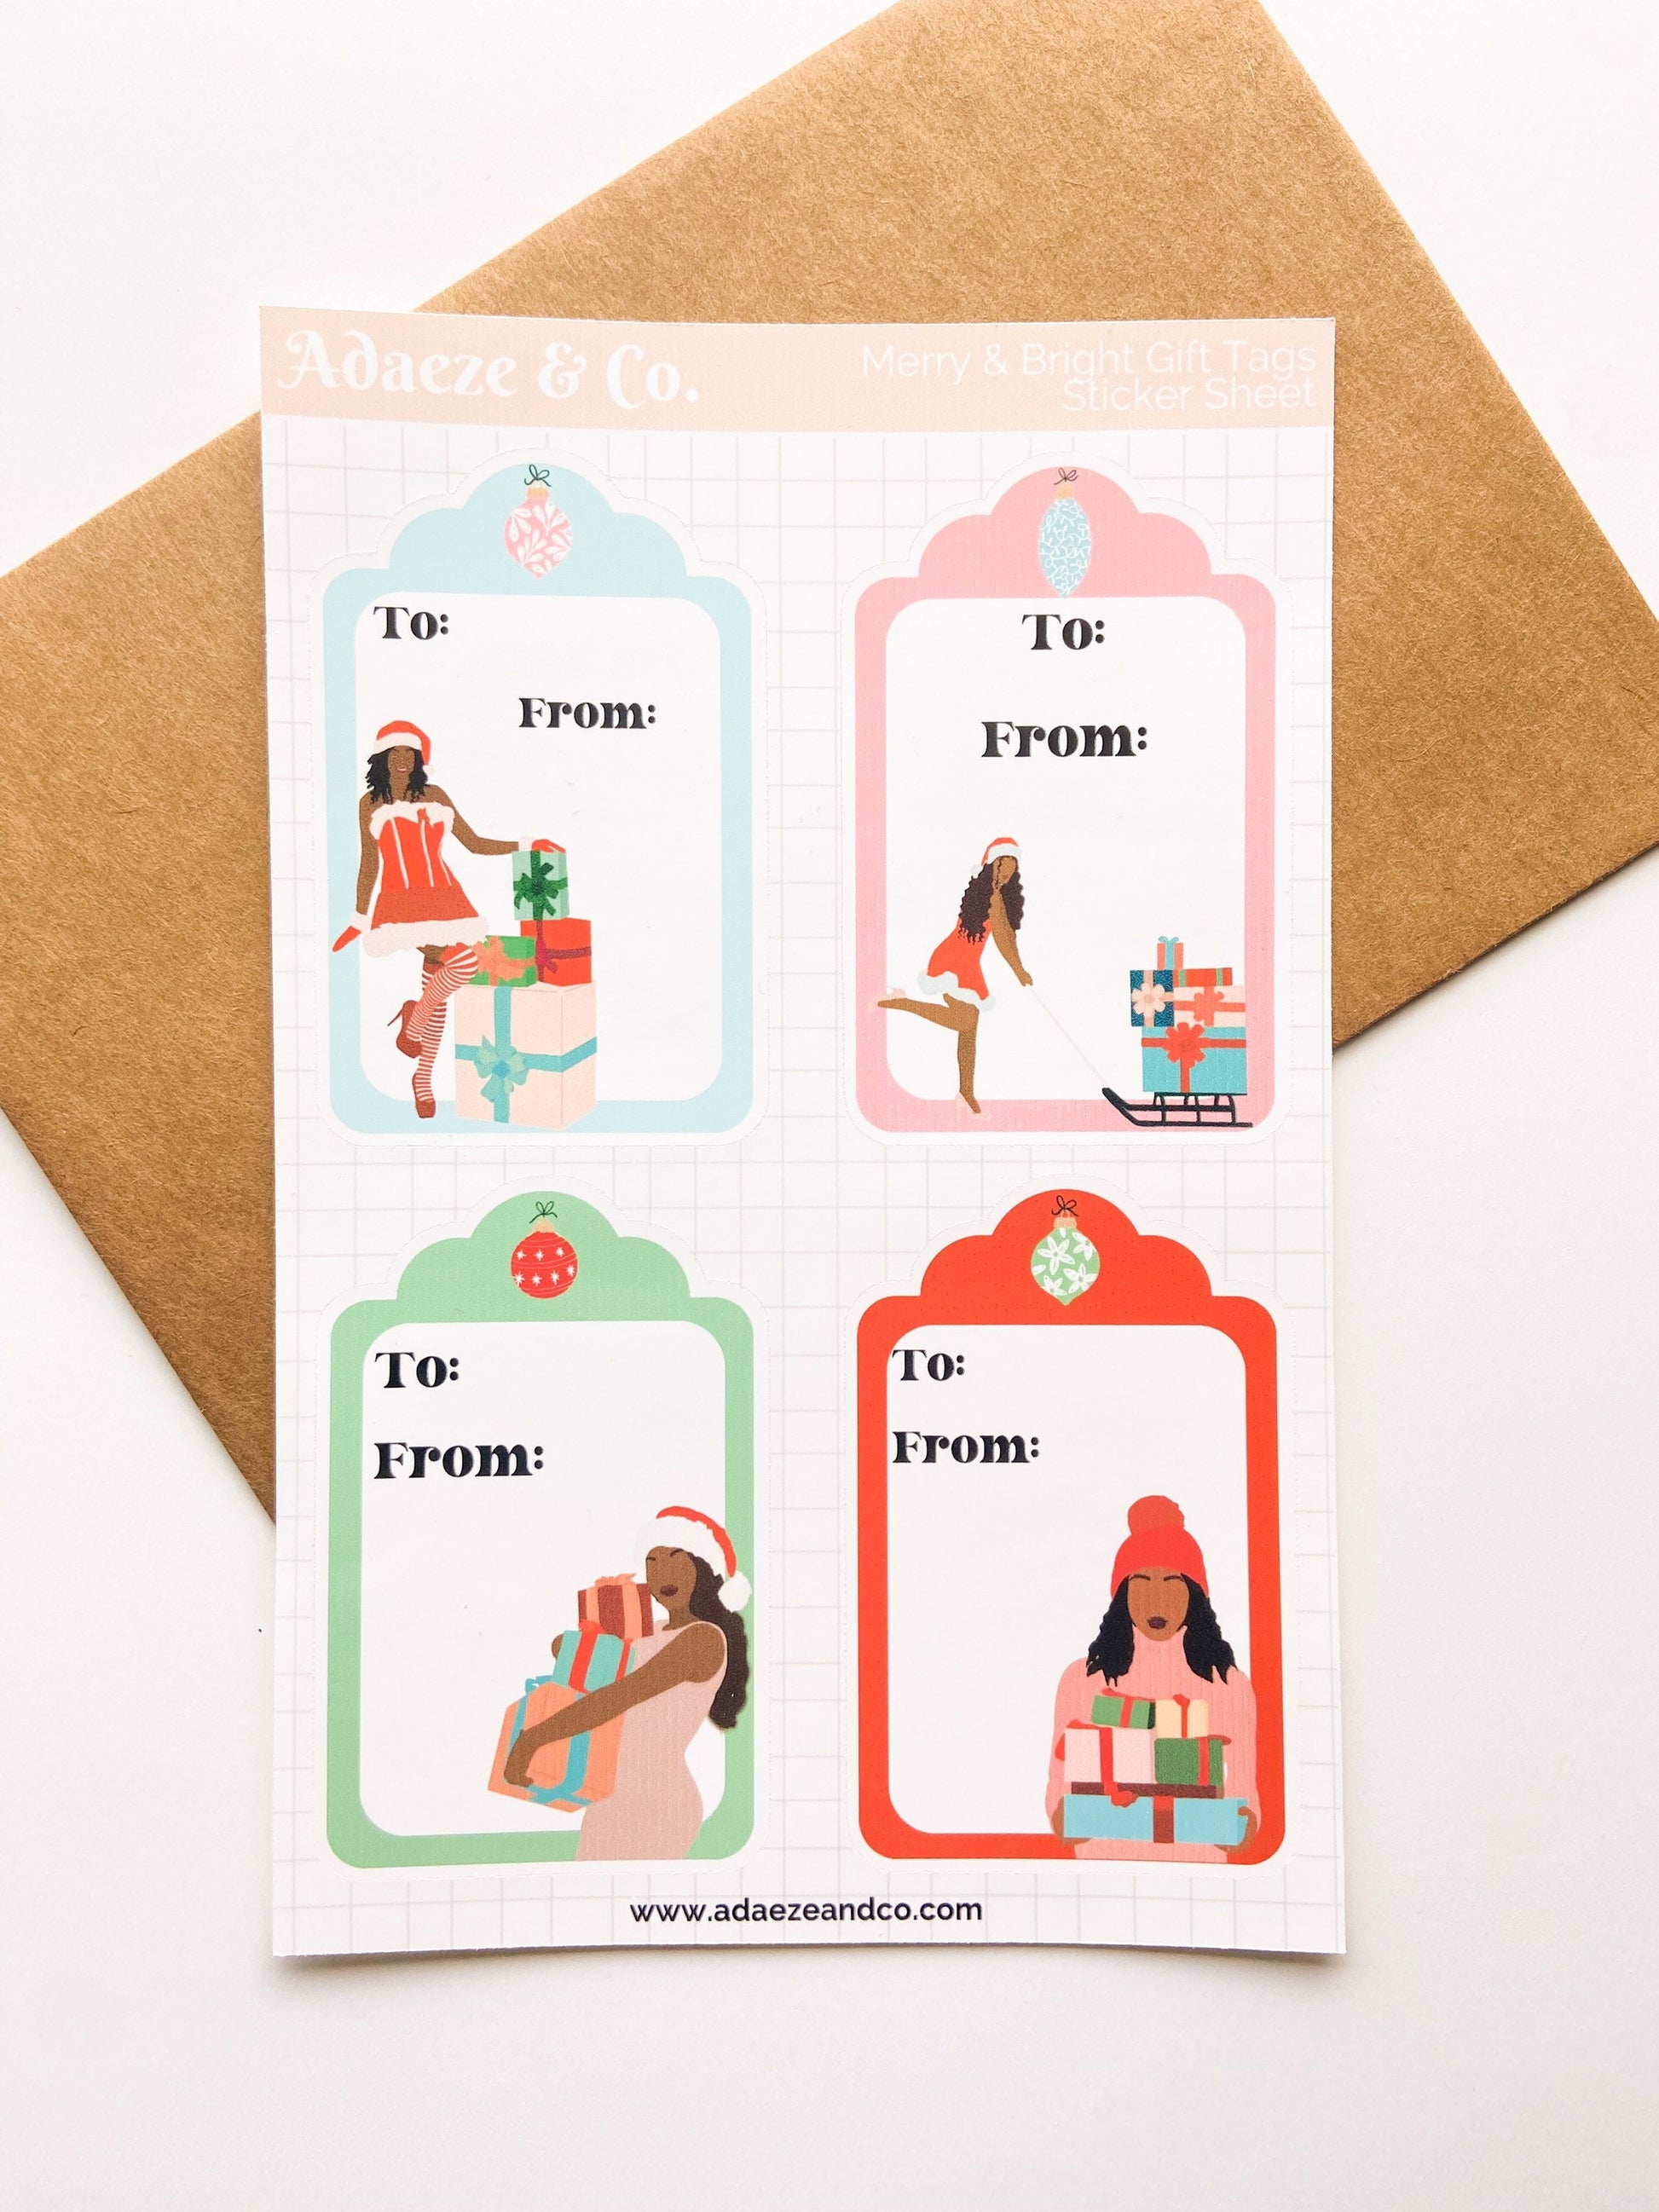 Holiday Gift Tags Sticker Sheet